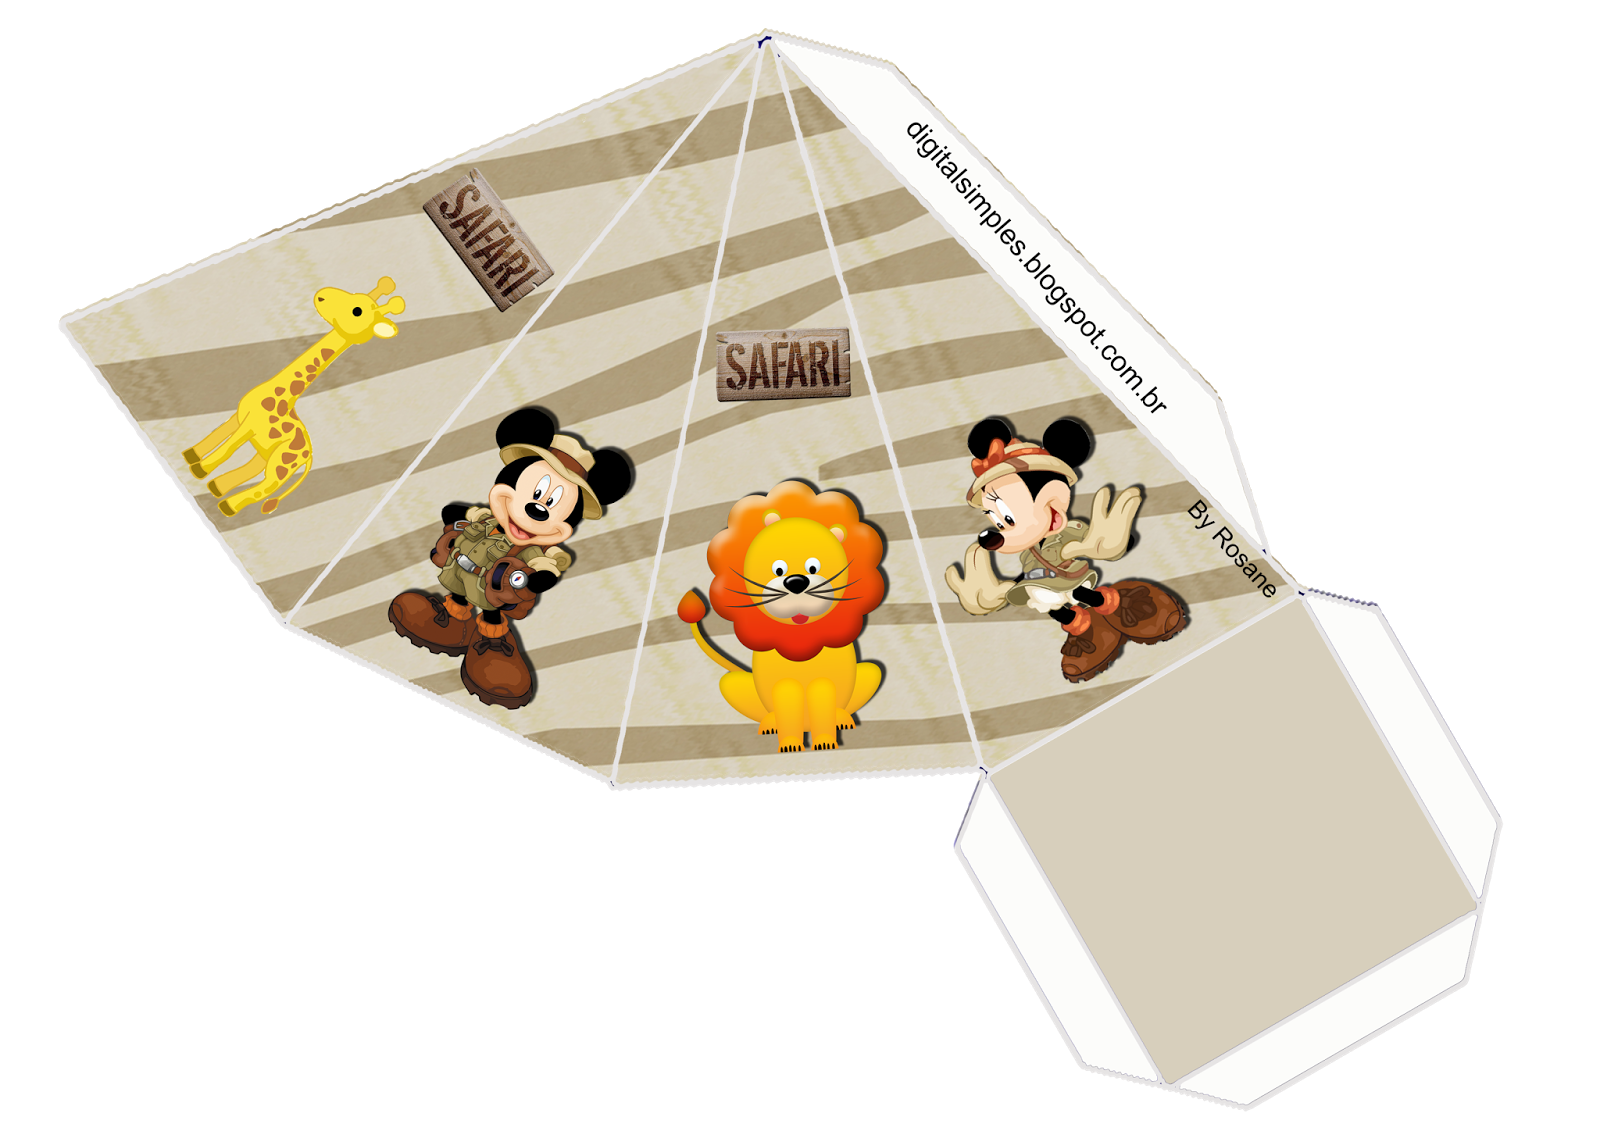 Mickey and Minnie Safari: Free Printable Boxes. - Oh My Fiesta! in english